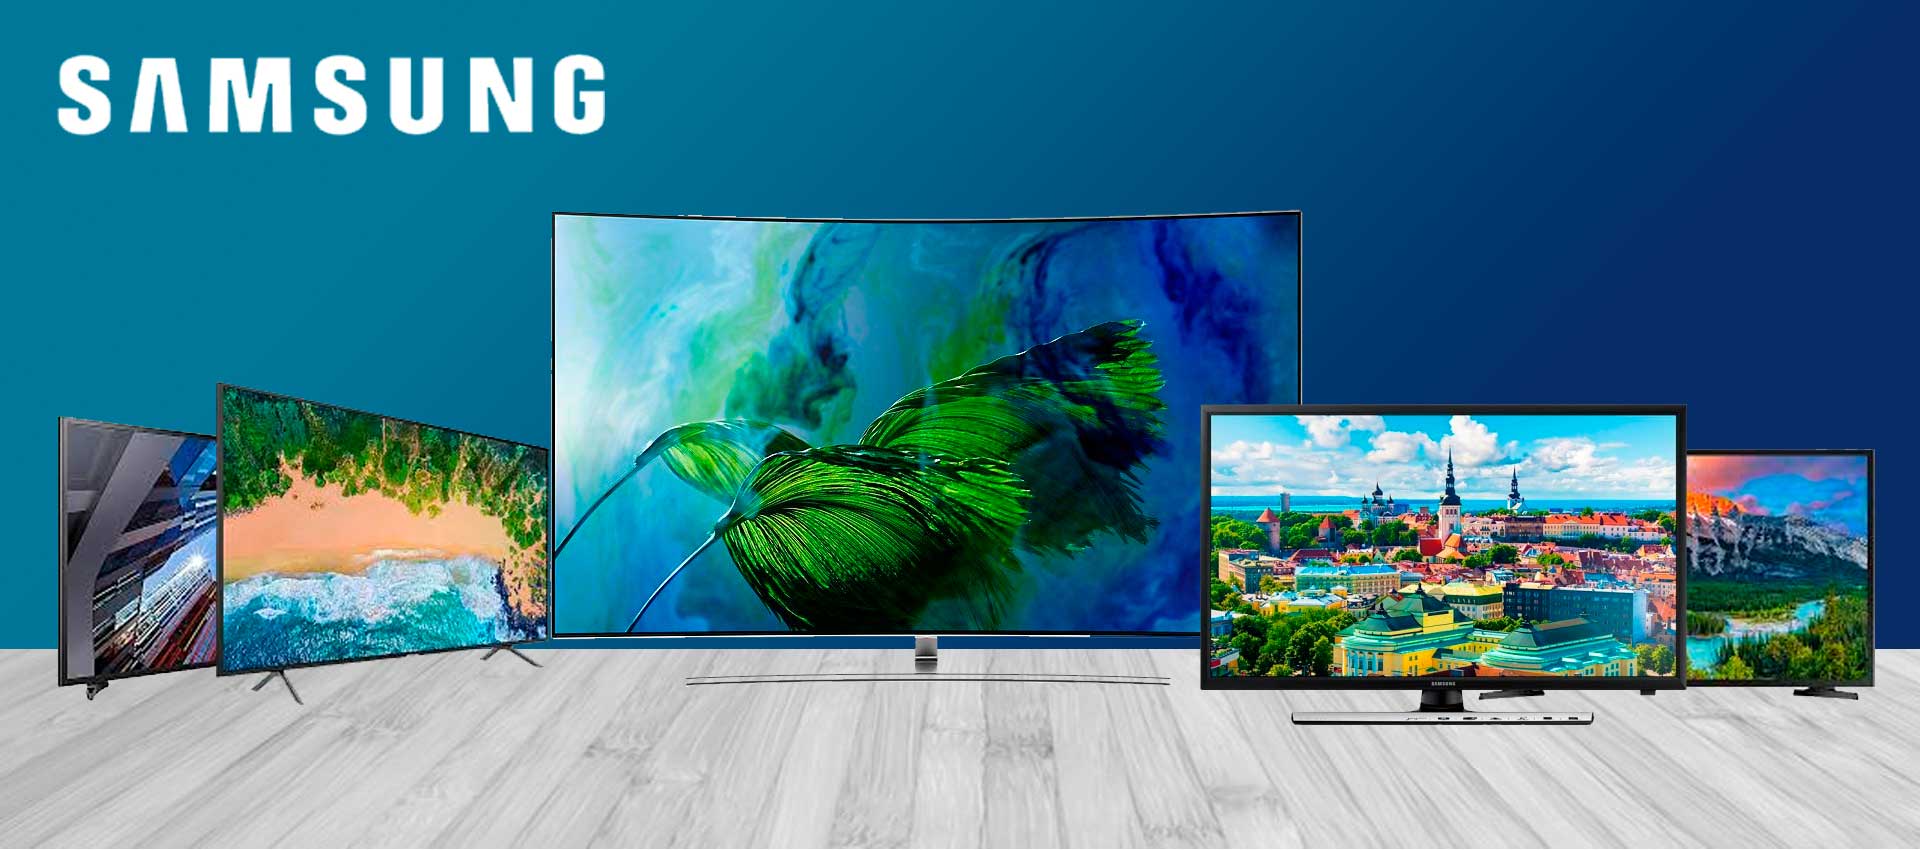 Latest Review on Samsung Led Tv in Pakistan - Latest Products in 2020